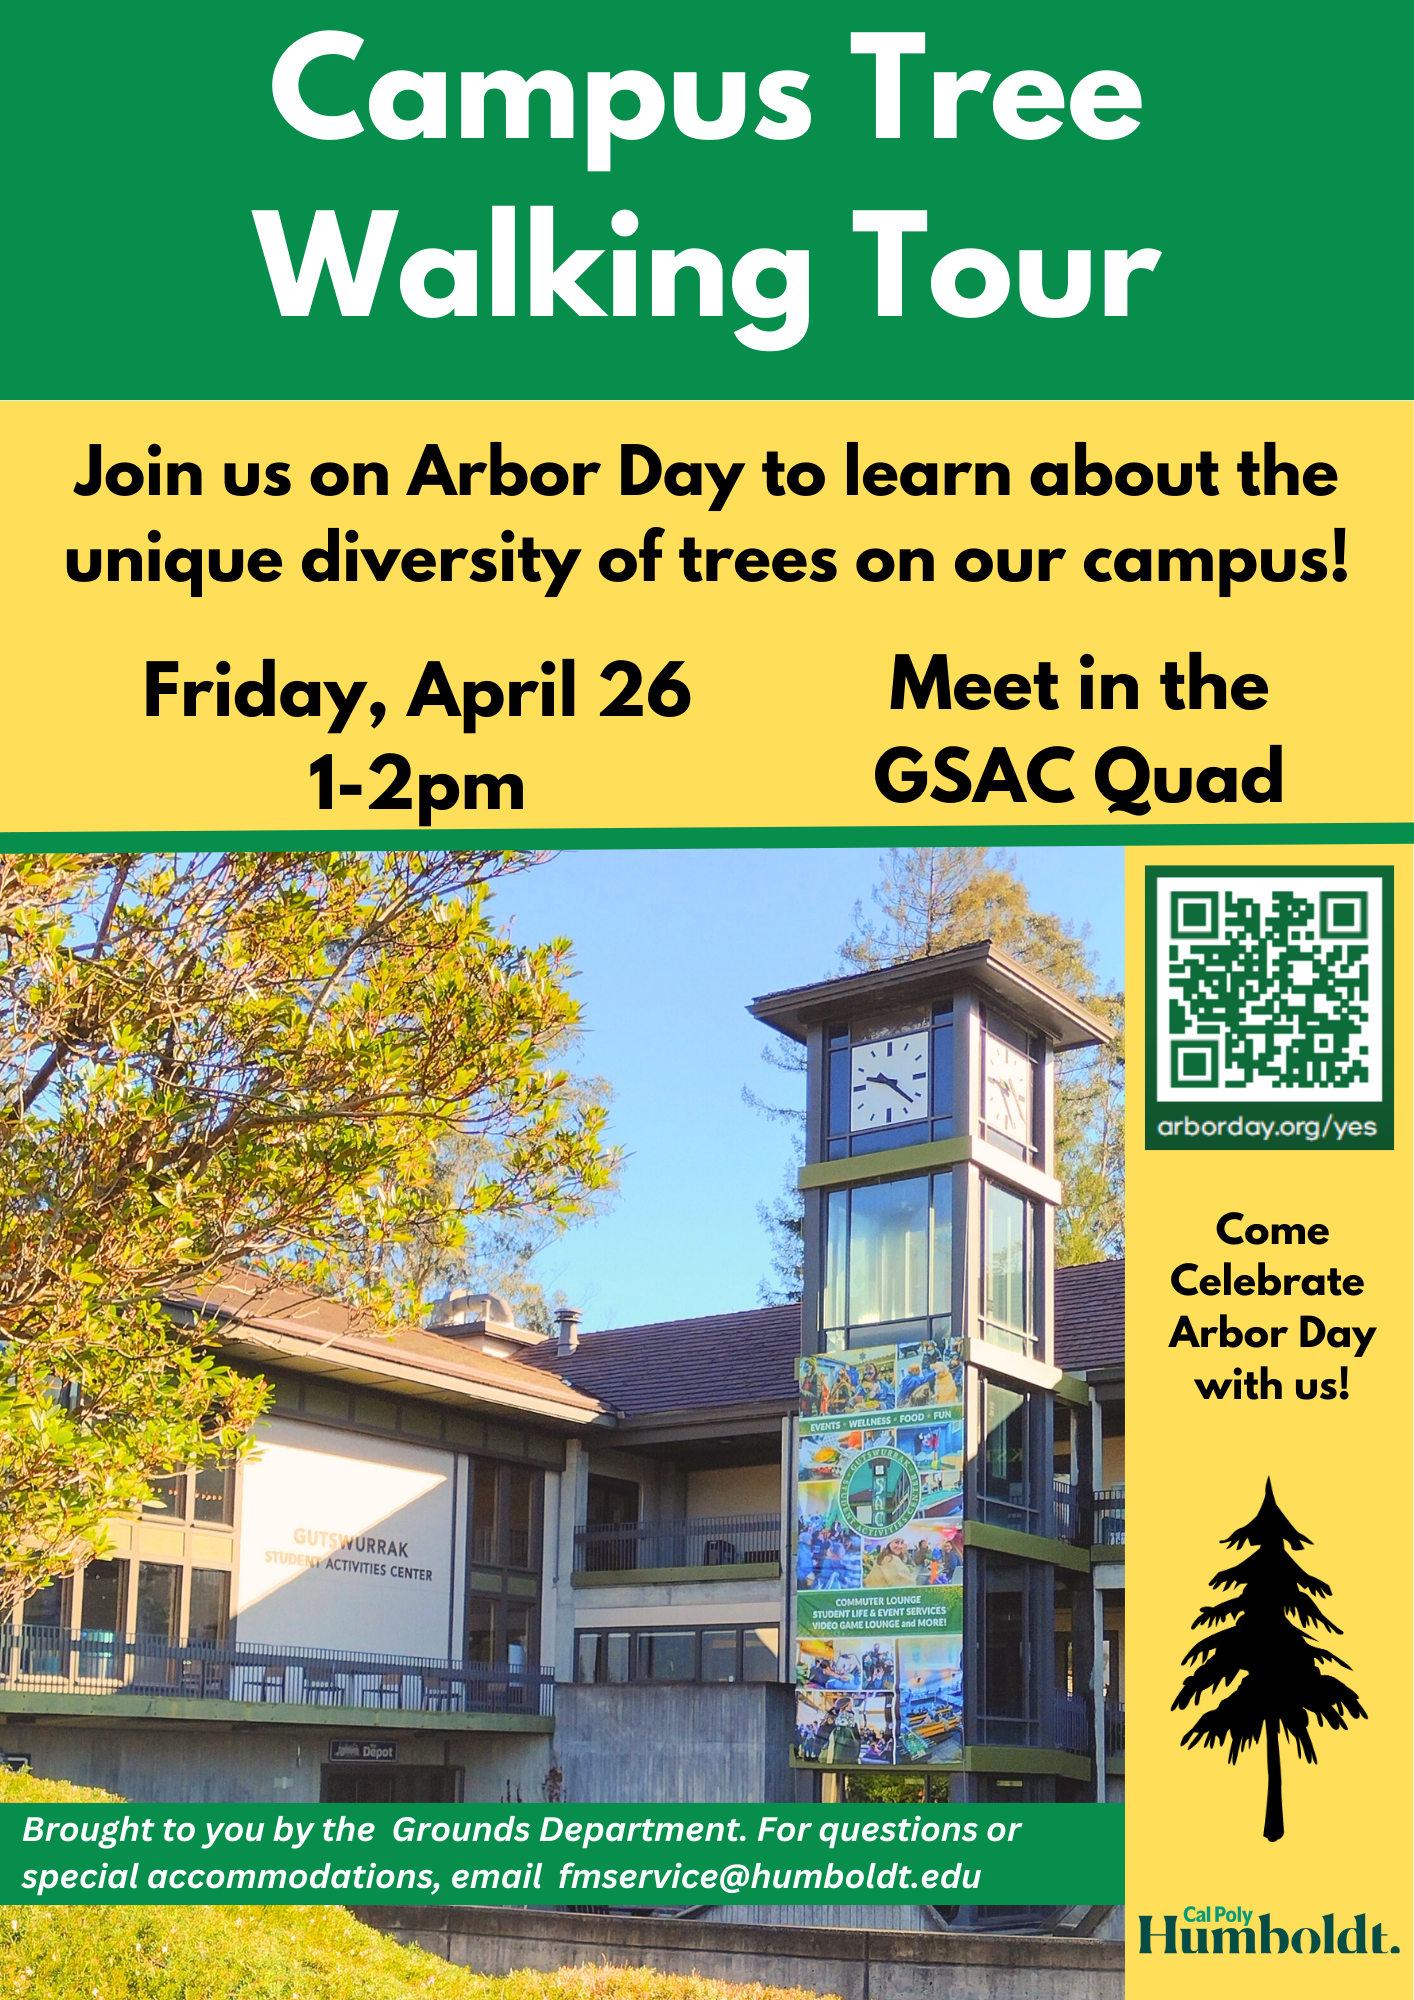 Flier for Campus Tree Walking Tour, Friday April 26, 2024, 1-2pm. Meet in the GSAC Quad. Email fmservice@humboldt.edu for questions or special accommodations